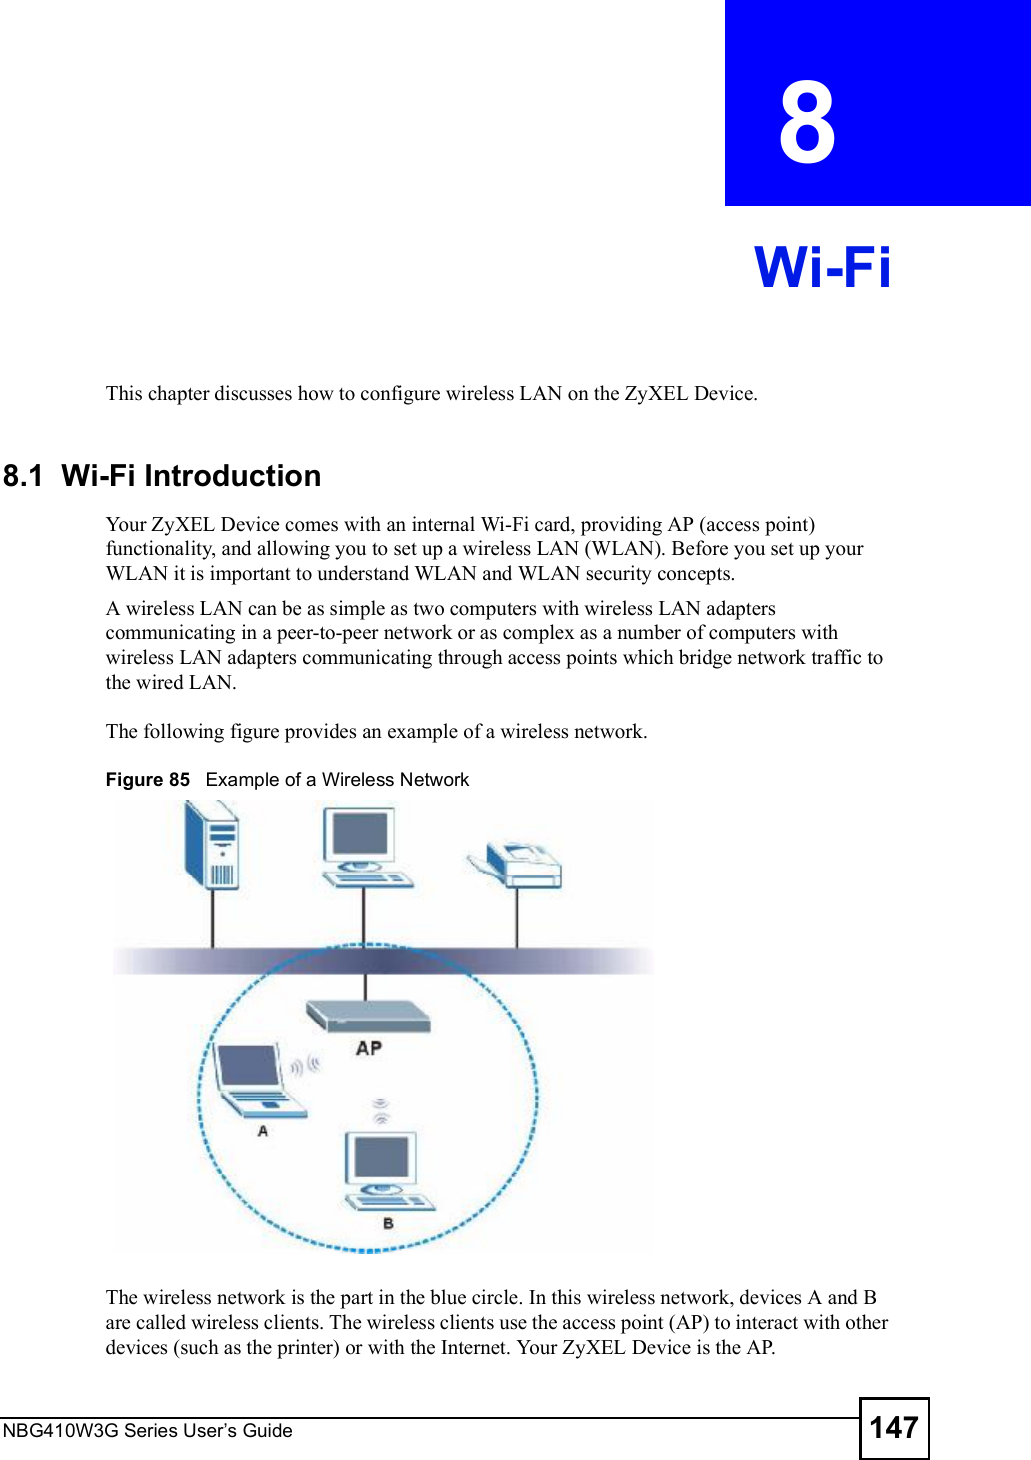 NBG410W3G Series User s Guide 147CHAPTER  8 Wi-FiThis chapter discusses how to configure wireless LAN on the ZyXEL Device.8.1  Wi-Fi IntroductionYour ZyXEL Device comes with an internal Wi-Fi card, providing AP (access point) functionality, and allowing you to set up a wireless LAN (WLAN). Before you set up your WLAN it is important to understand WLAN and WLAN security concepts.A wireless LAN can be as simple as two computers with wireless LAN adapters communicating in a peer-to-peer network or as complex as a number of computers with wireless LAN adapters communicating through access points which bridge network traffic to the wired LAN. The following figure provides an example of a wireless network.Figure 85   Example of a Wireless NetworkThe wireless network is the part in the blue circle. In this wireless network, devices A and B are called wireless clients. The wireless clients use the access point (AP) to interact with other devices (such as the printer) or with the Internet. Your ZyXEL Device is the AP.